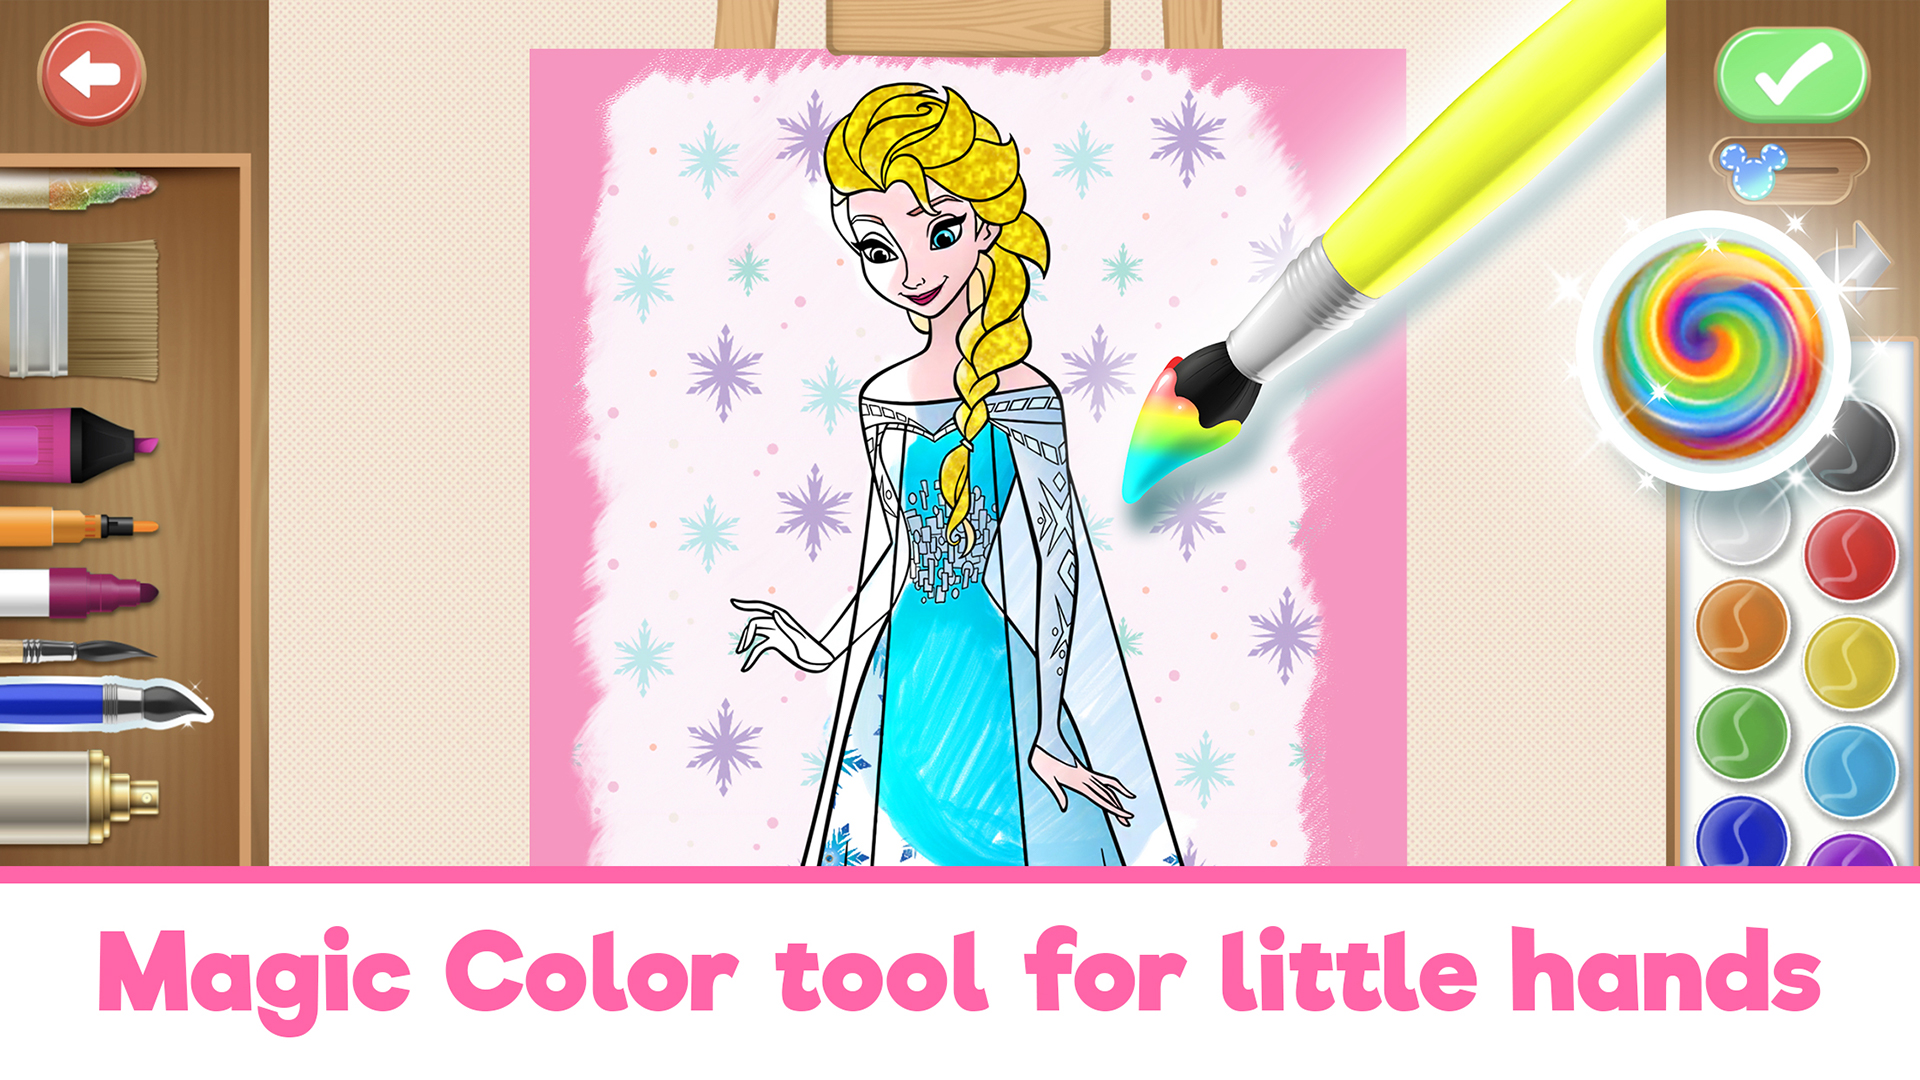 Disney Coloring World - Coloring, Drawing, Painting & Art Games for Kids